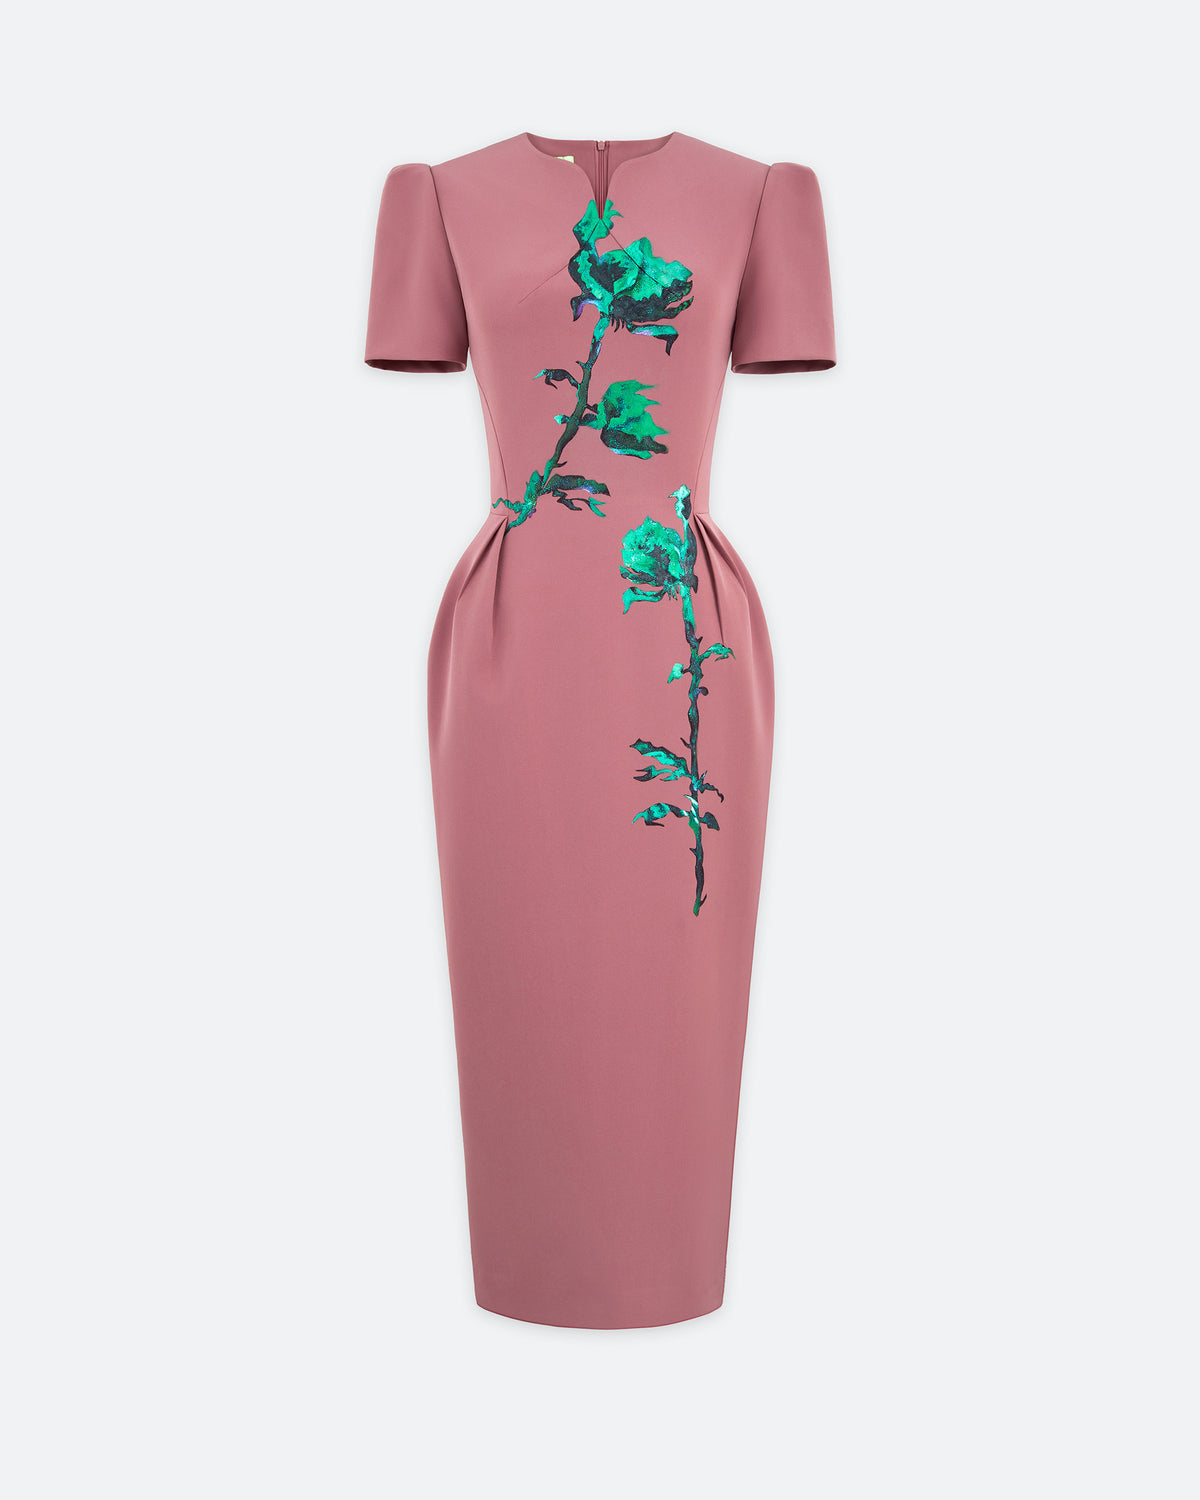 Tiny Ink rose pink midi dress with hand-painted green floral artwork, short sleeves, and a fitted waist